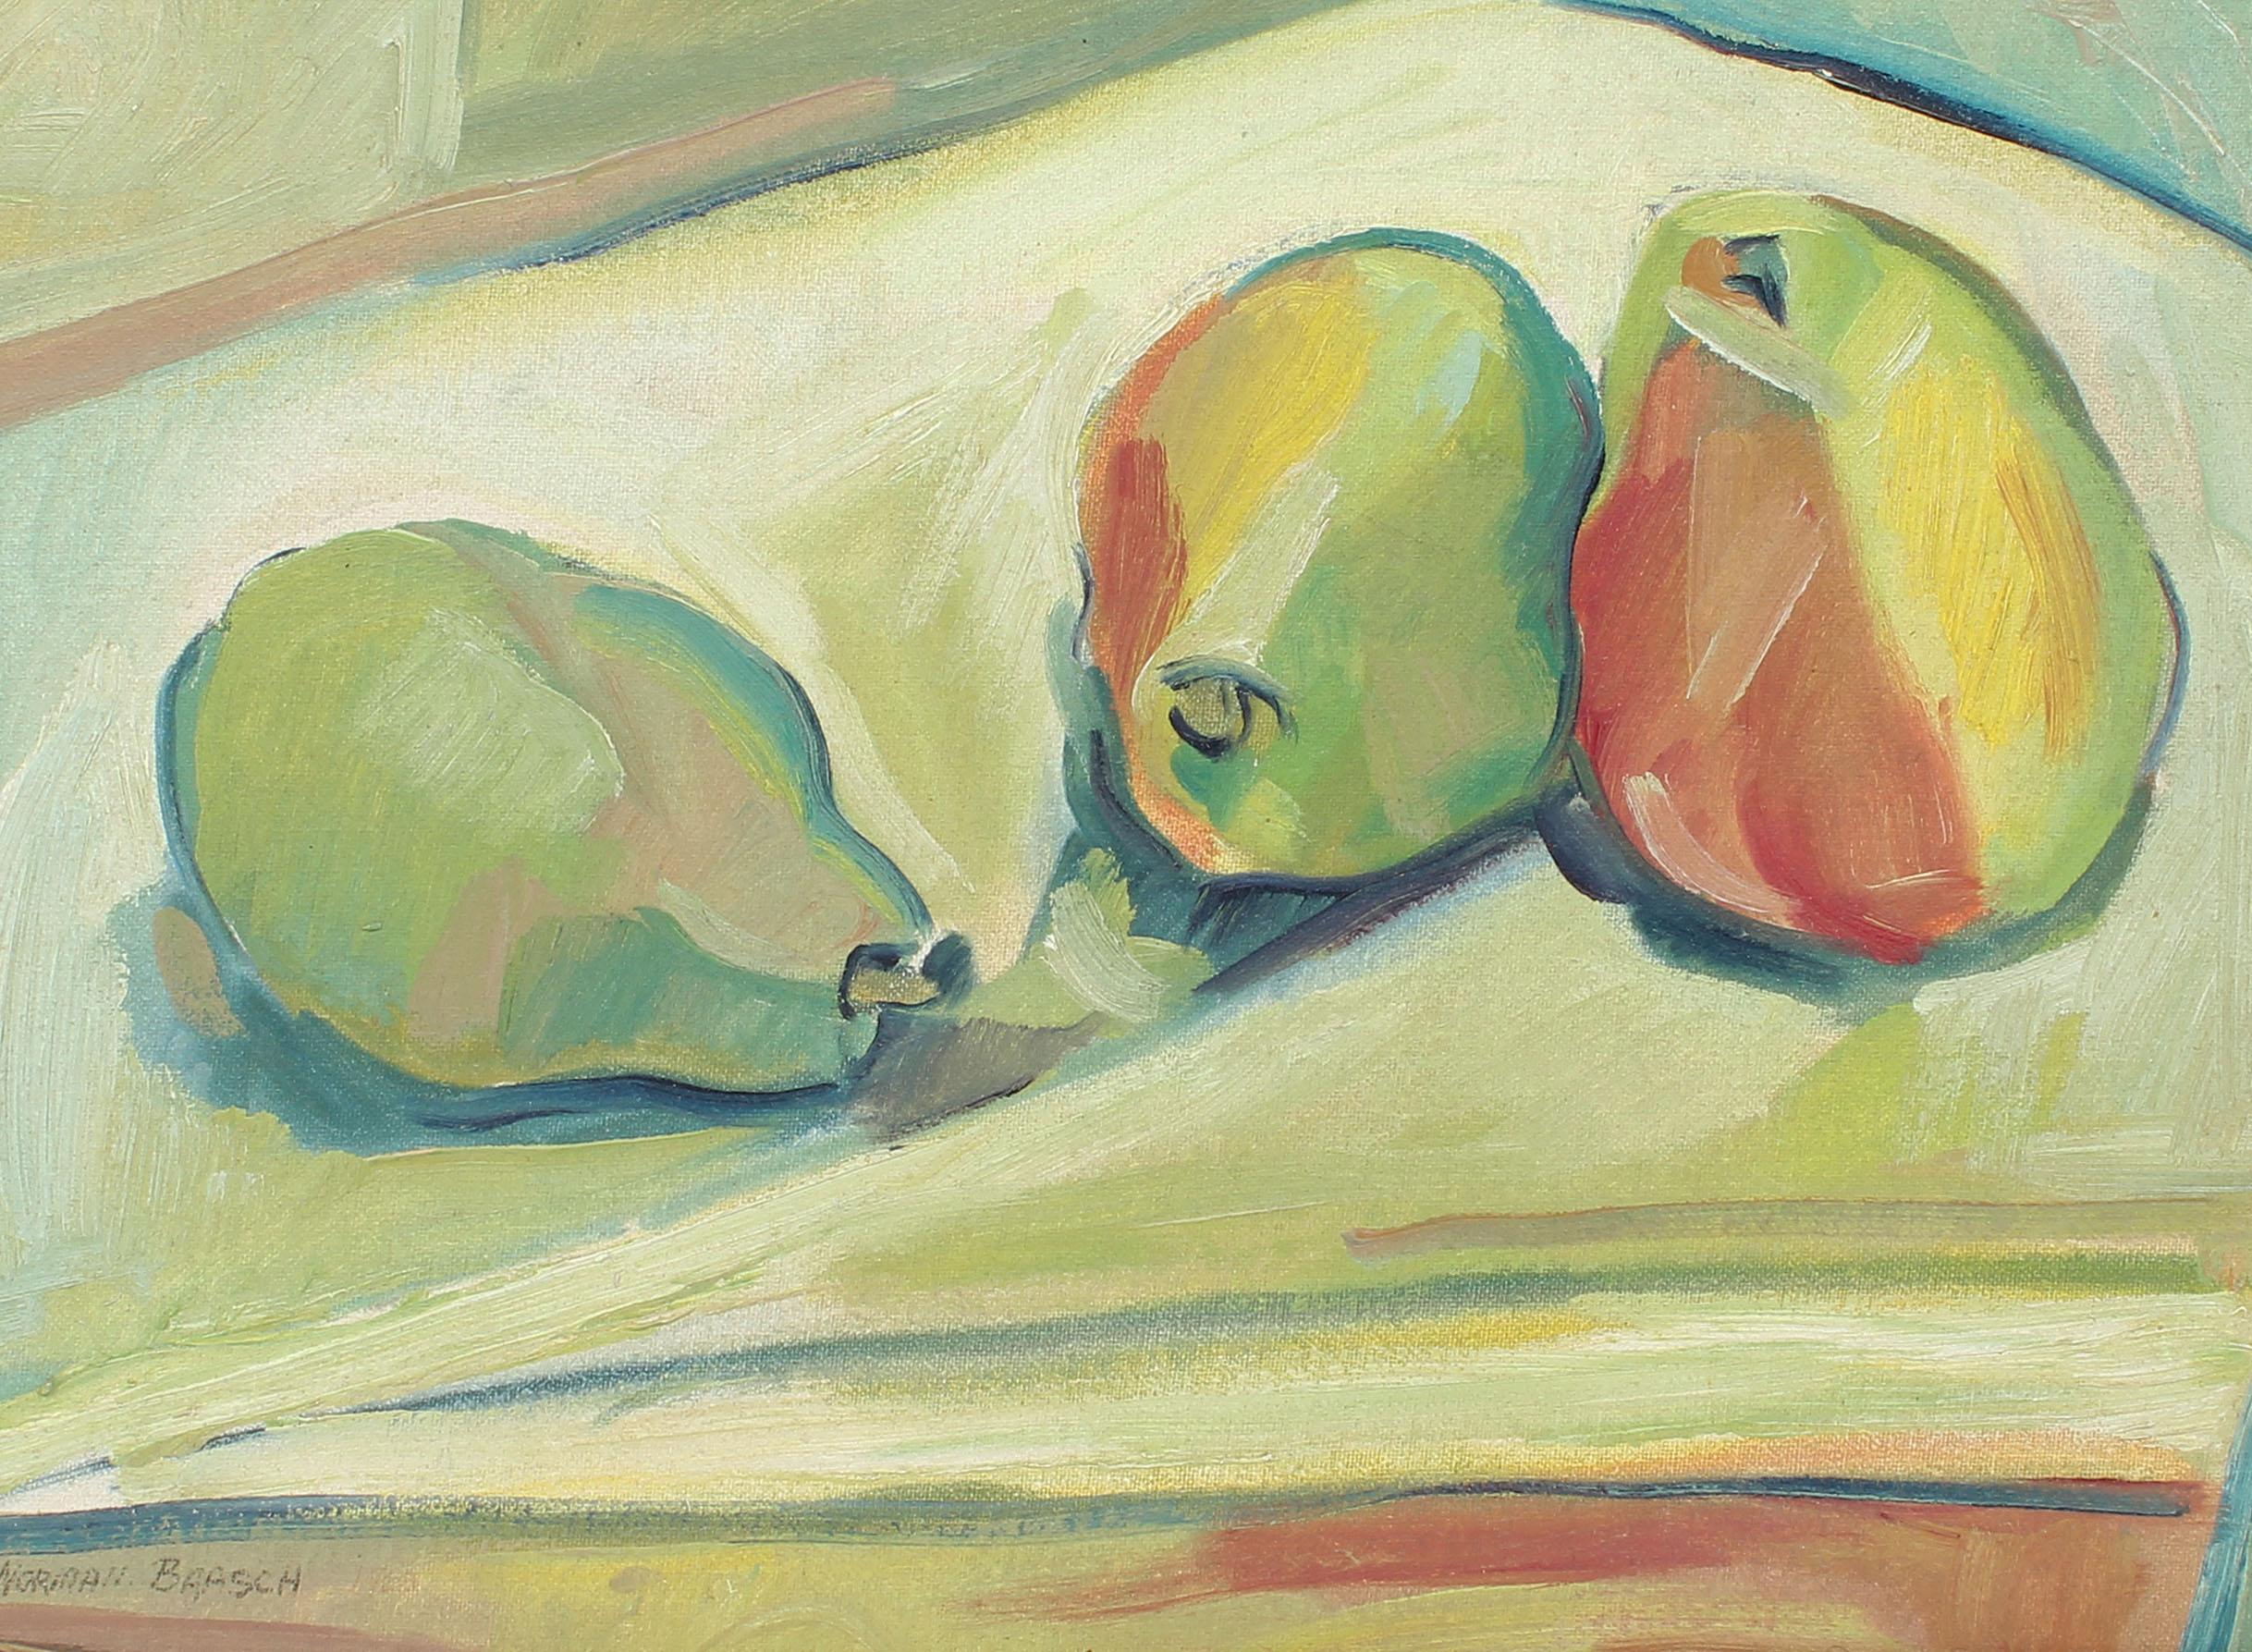 Antique American Modernist Cubist Fruit Still Life Signed Texas Oil Painting - Beige Abstract Painting by Norman Baasch